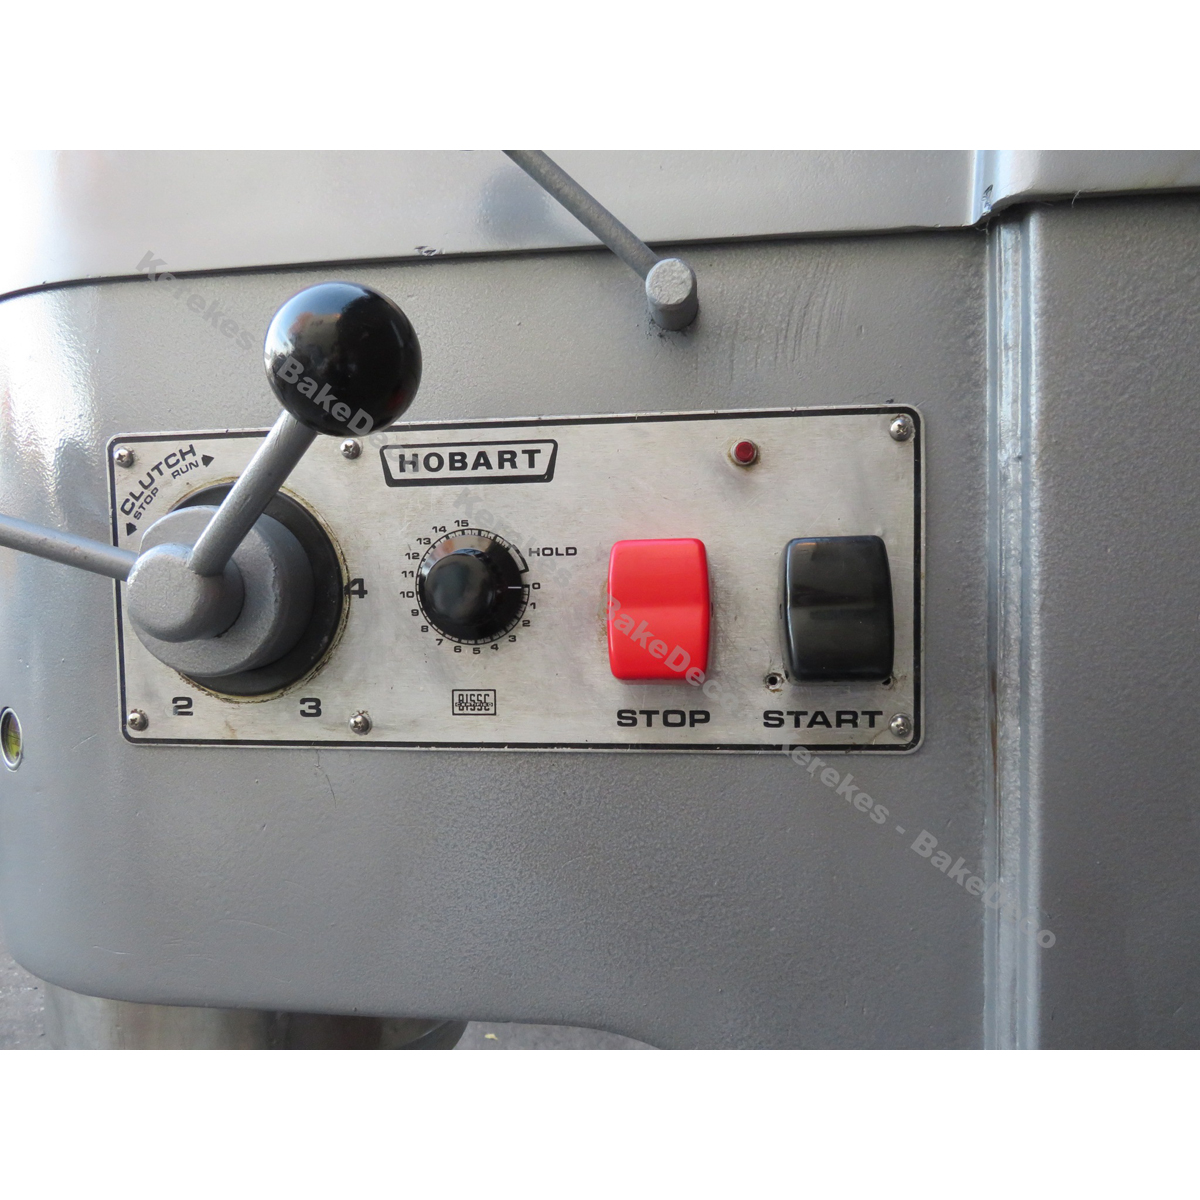 Hobart 80 Quart M802 Mixer, Used Great Condition image 3